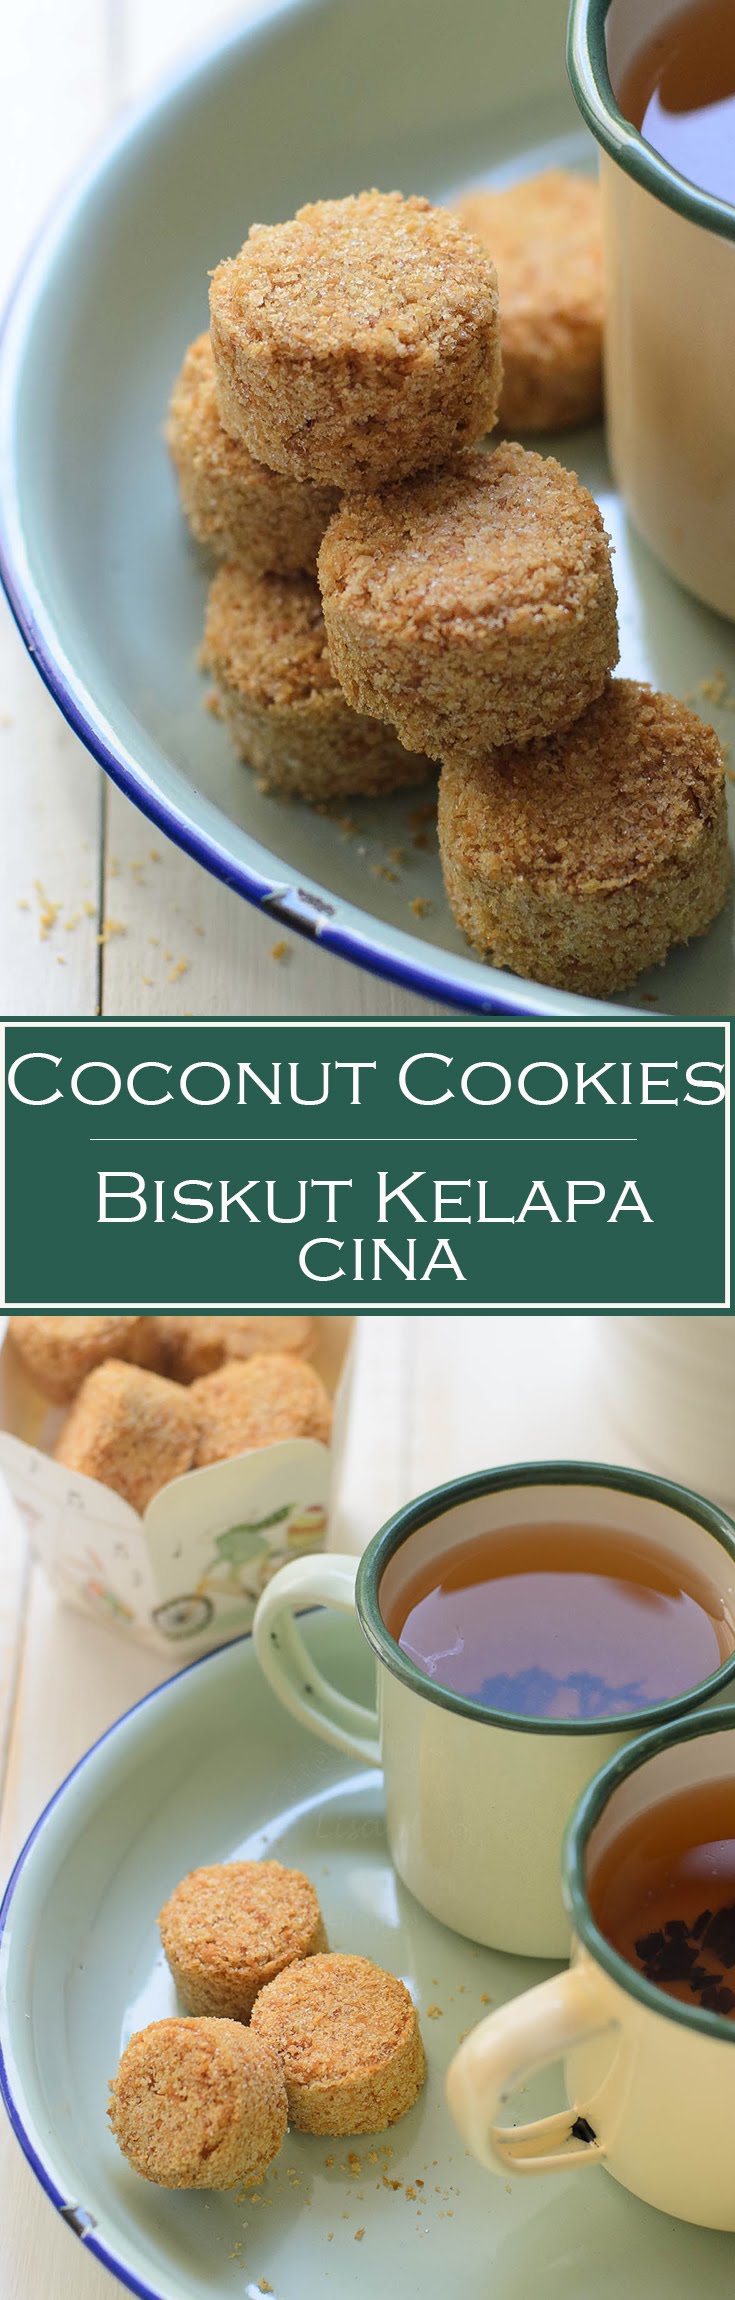 Coconut cookies/ biskut kelapa cina are made of over baked dinner rolls and desiccated coconut.  These cookies are addictively delicious. One of my favourite childhood school snack.